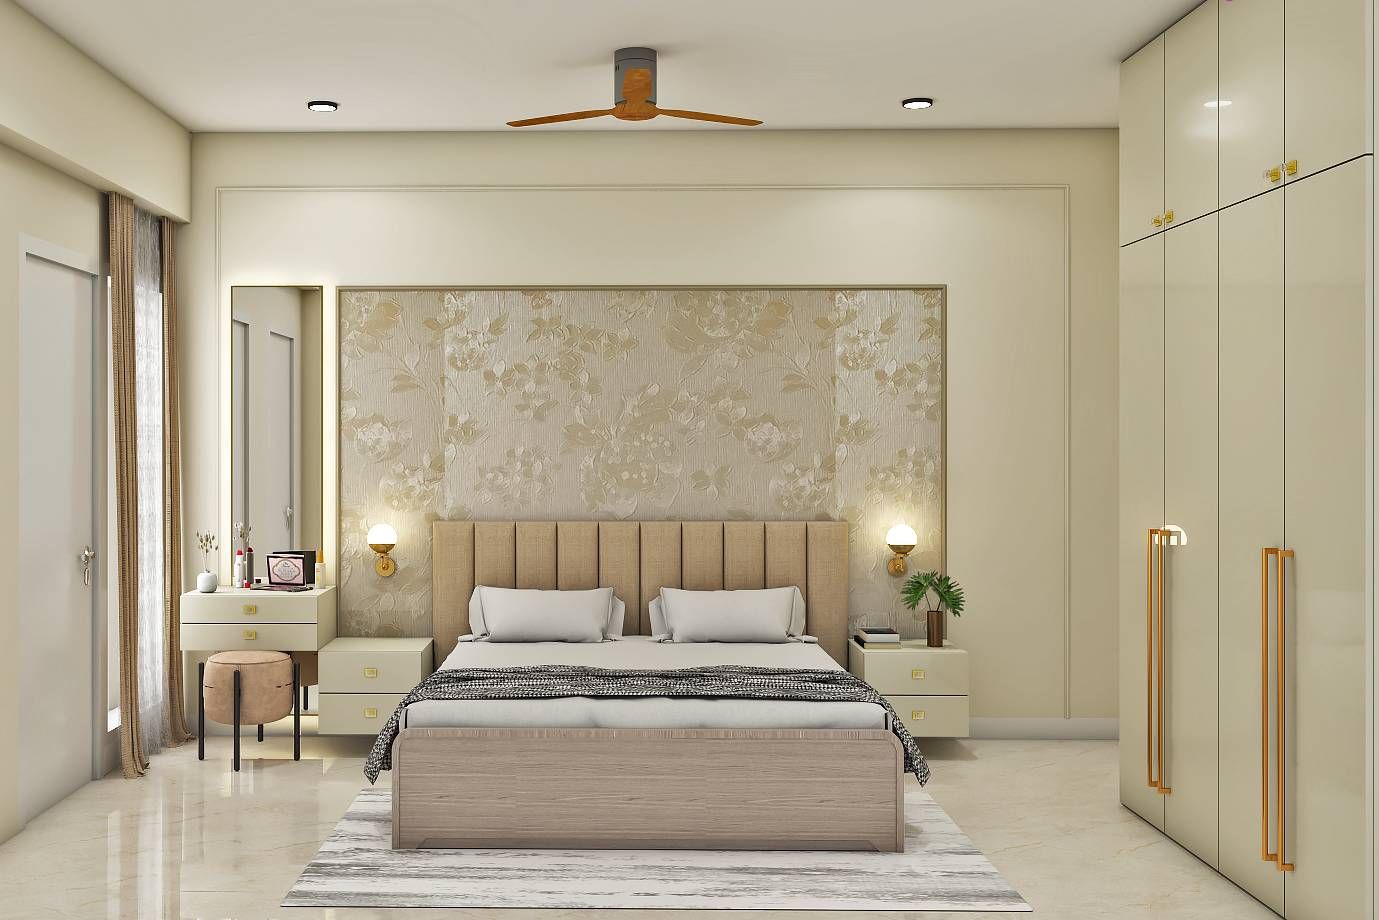 Contemporary Master Bedroom Design With Wooden Finish Bed